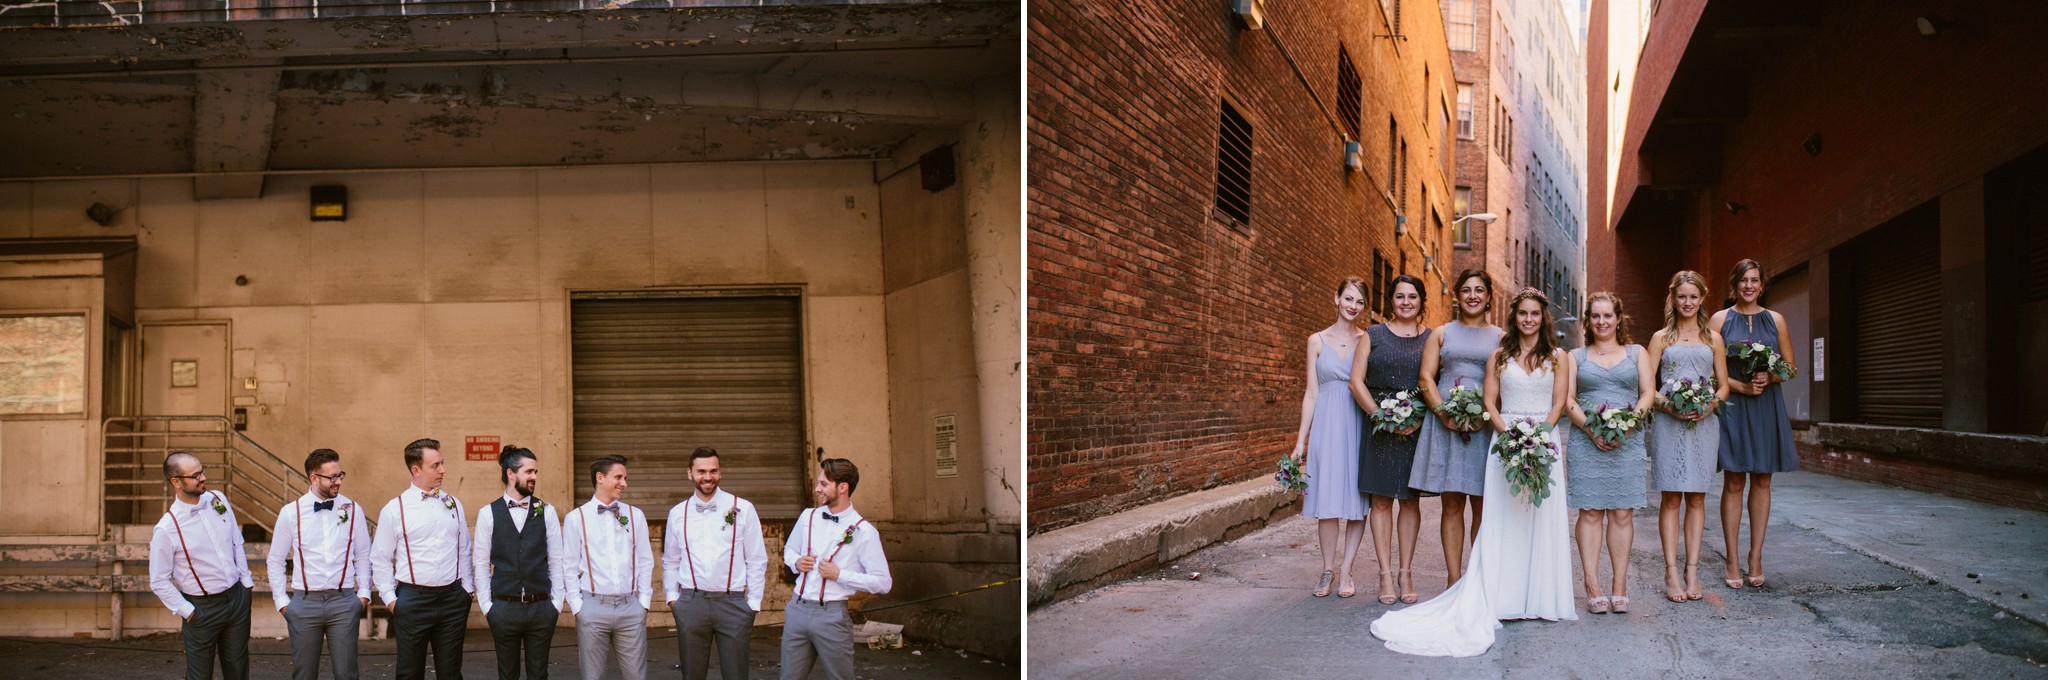 downtown-cleveland-red-space-events-wedding-photos-25